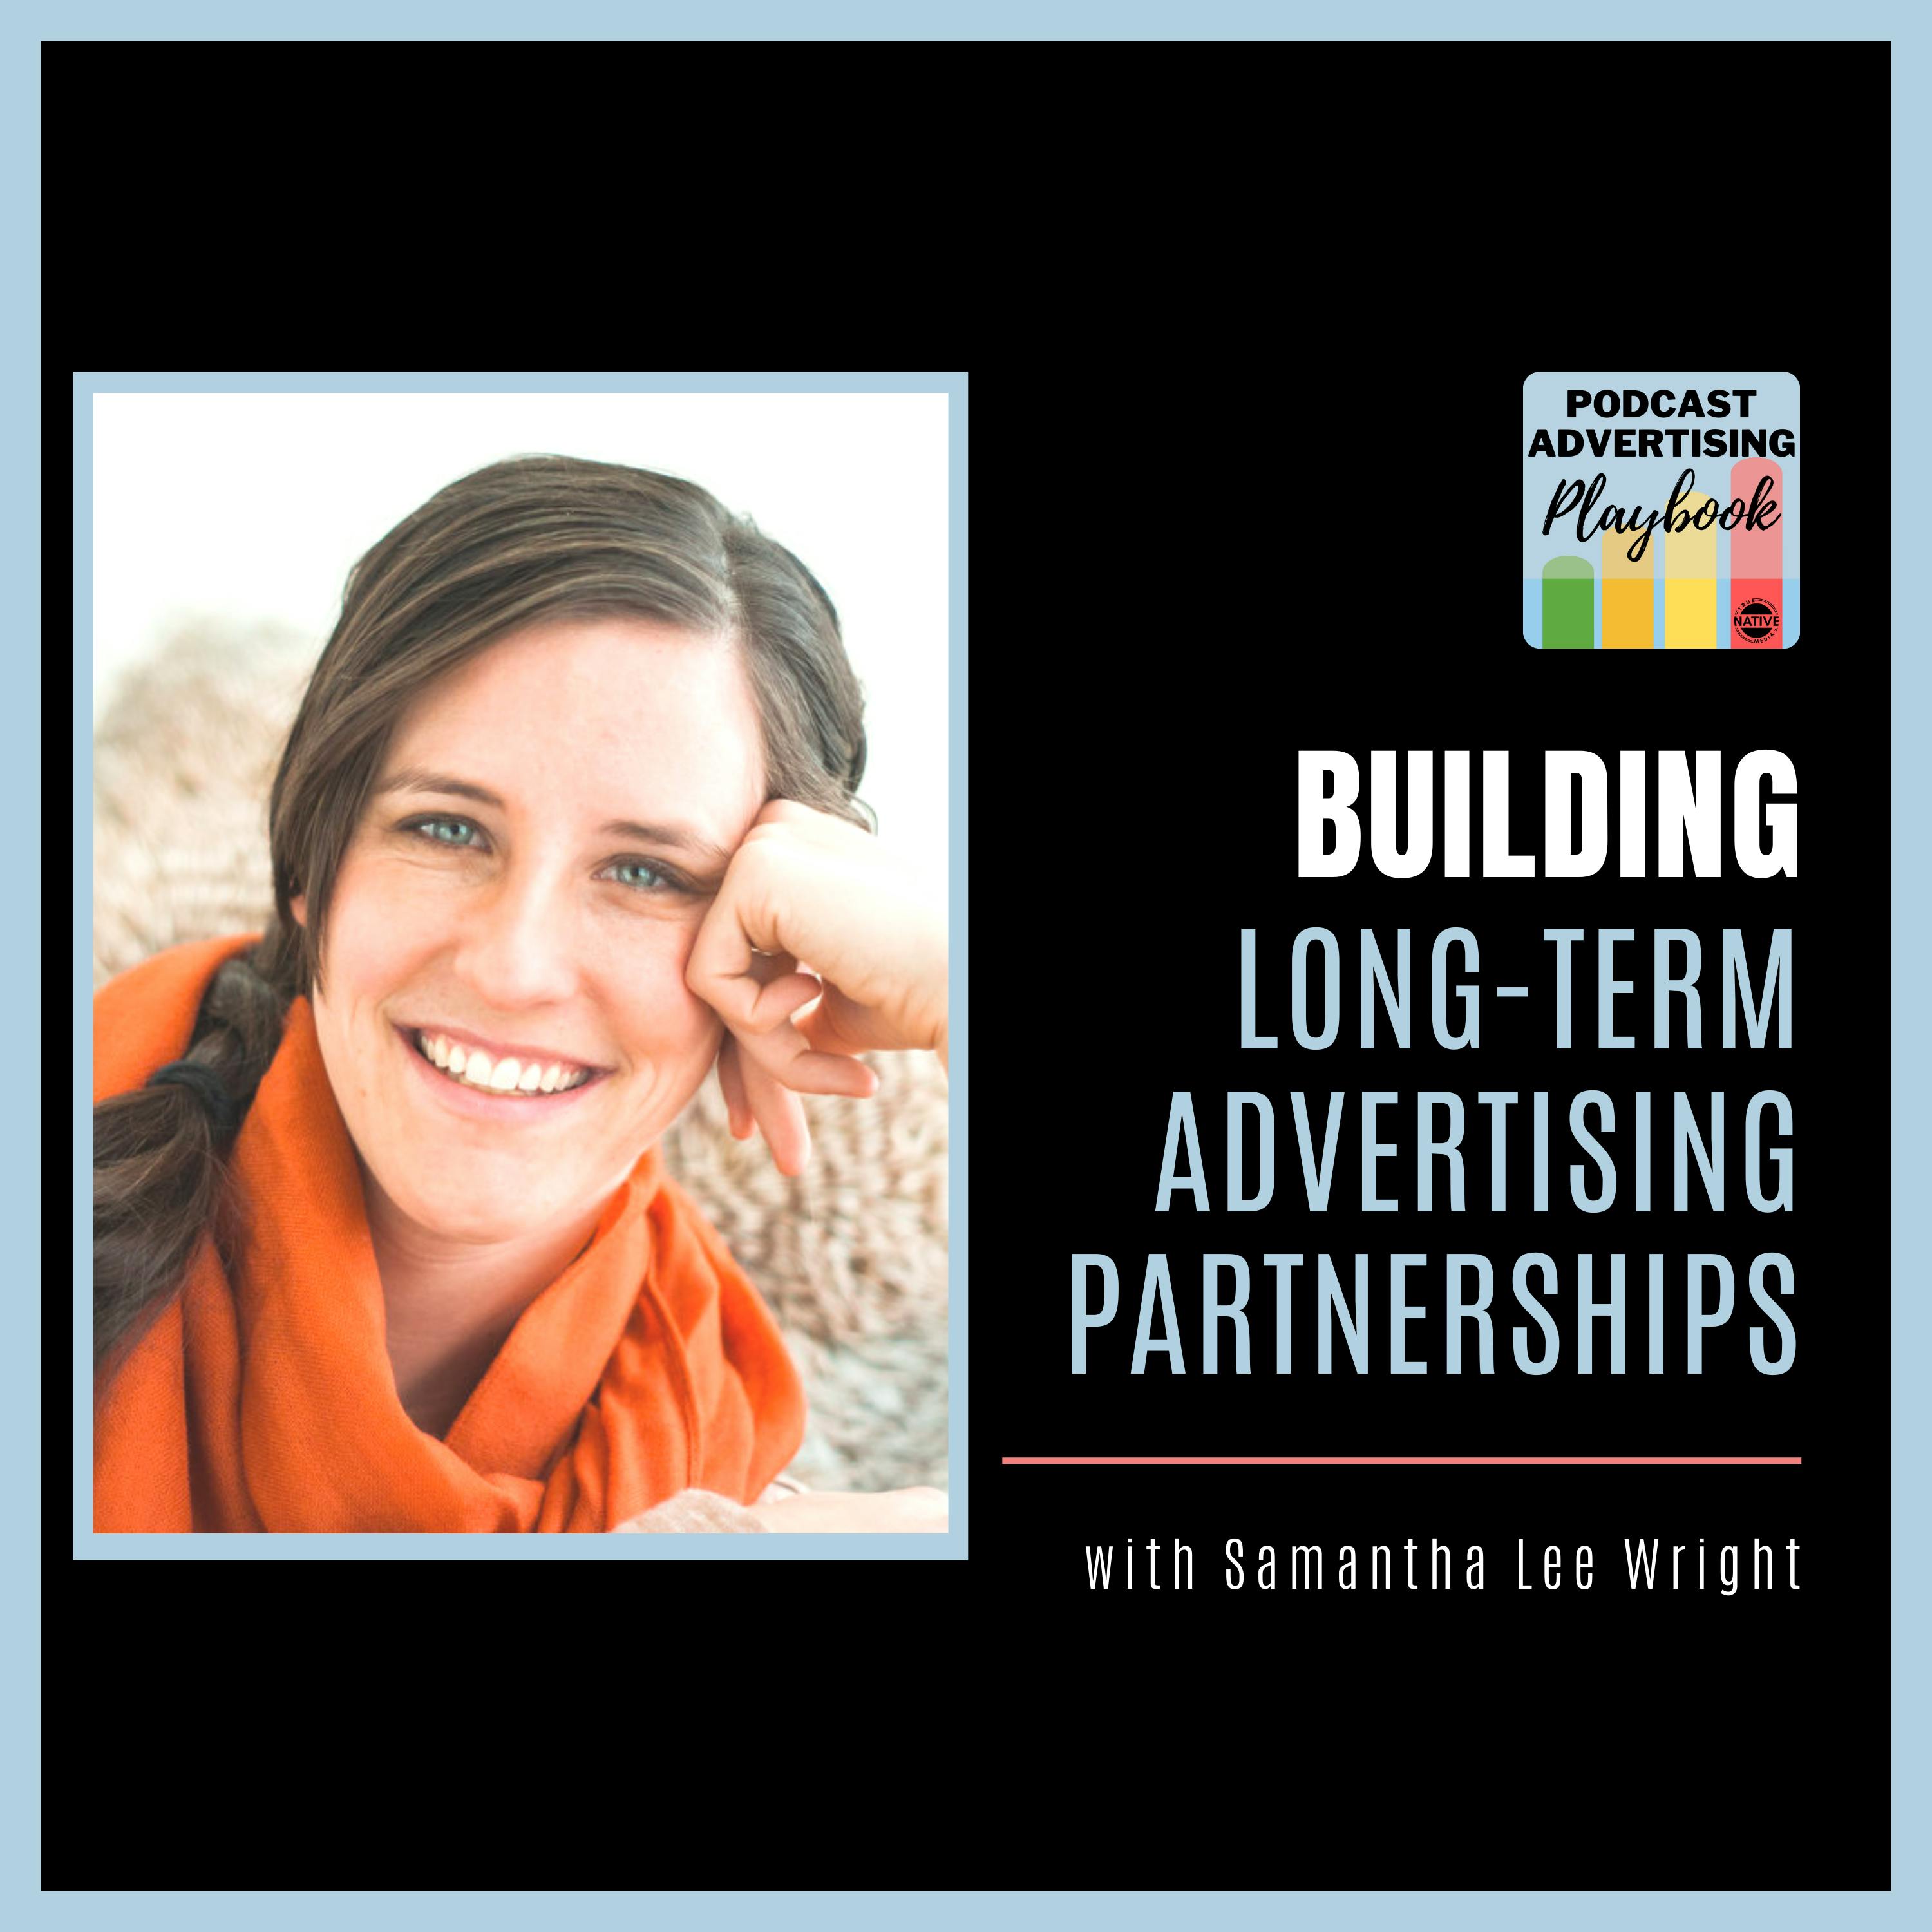 How To Secure Long-Term Podcast Advertising Partnerships